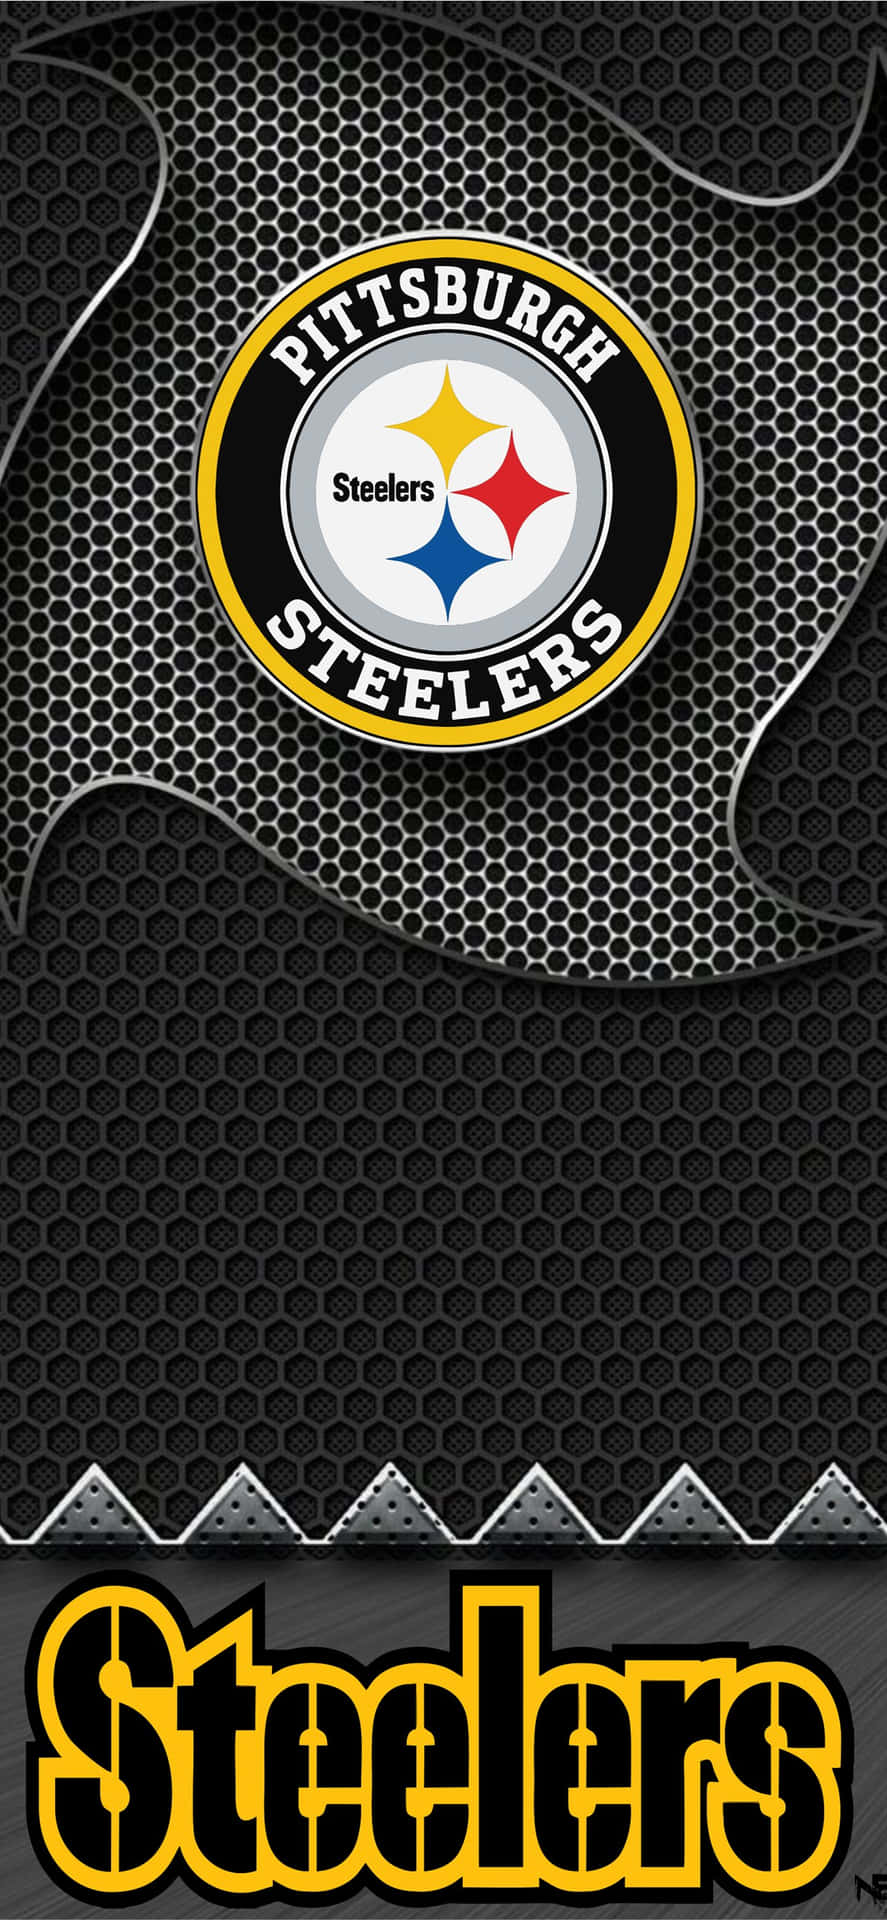 NFL Fans Rejoice: Show Your Team Pride with Steelers IPhone Wallpaper Wallpaper